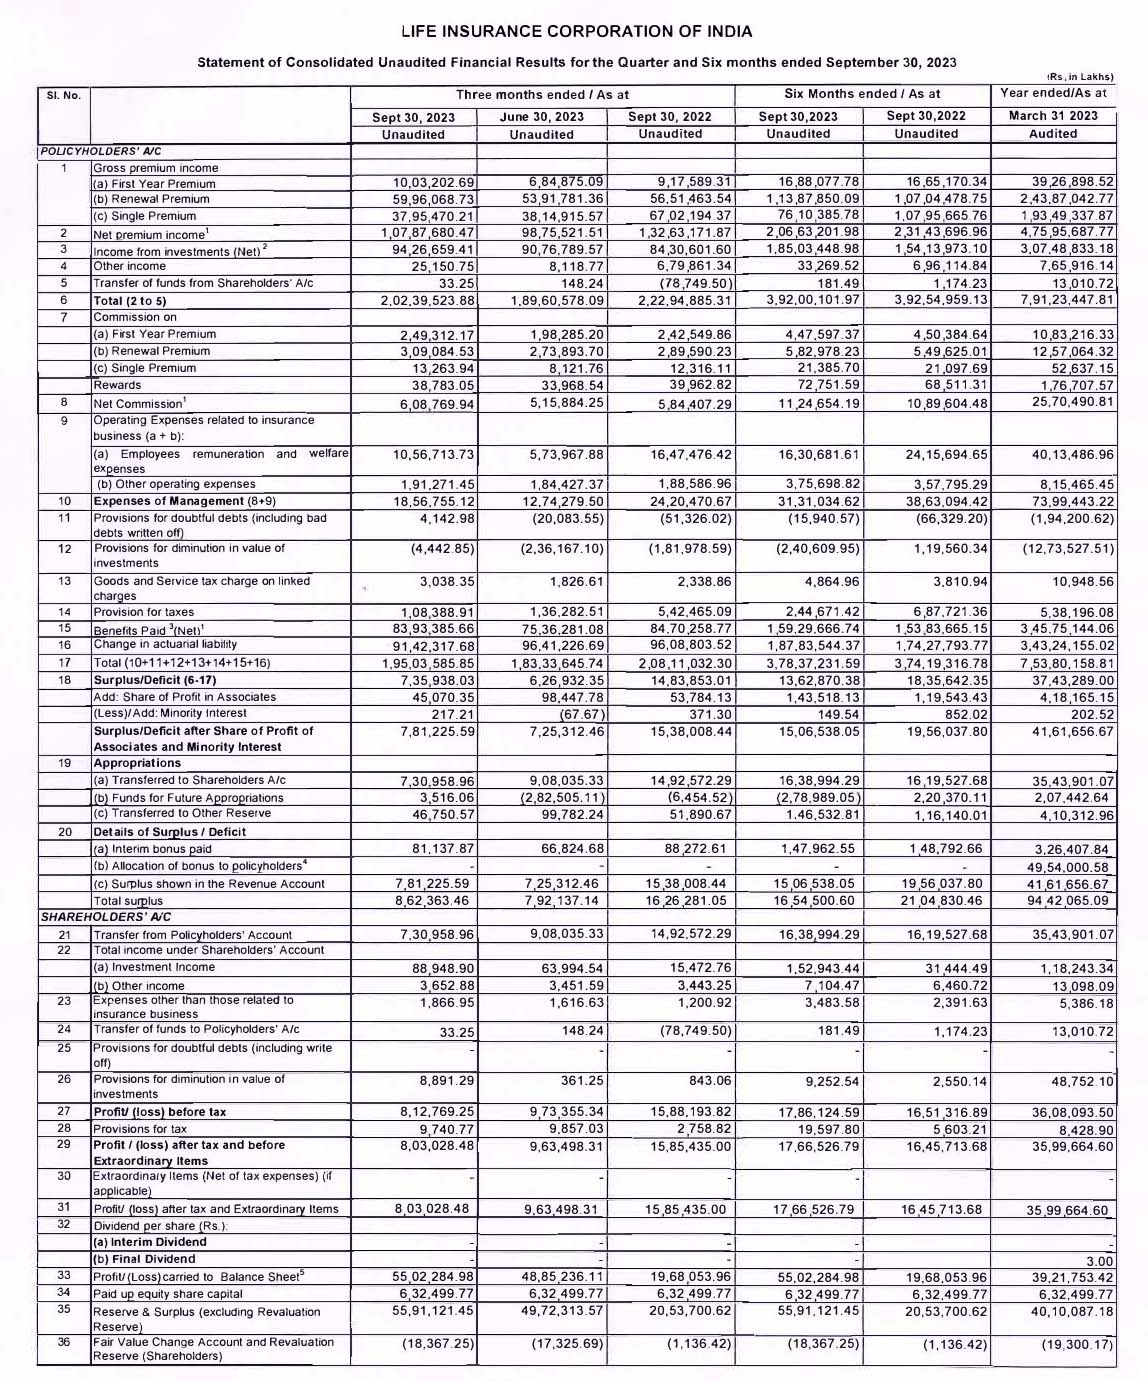 Life Insurance Corporation of India Ltd Second Quarter of Financial Year 2023-2024 Results 3